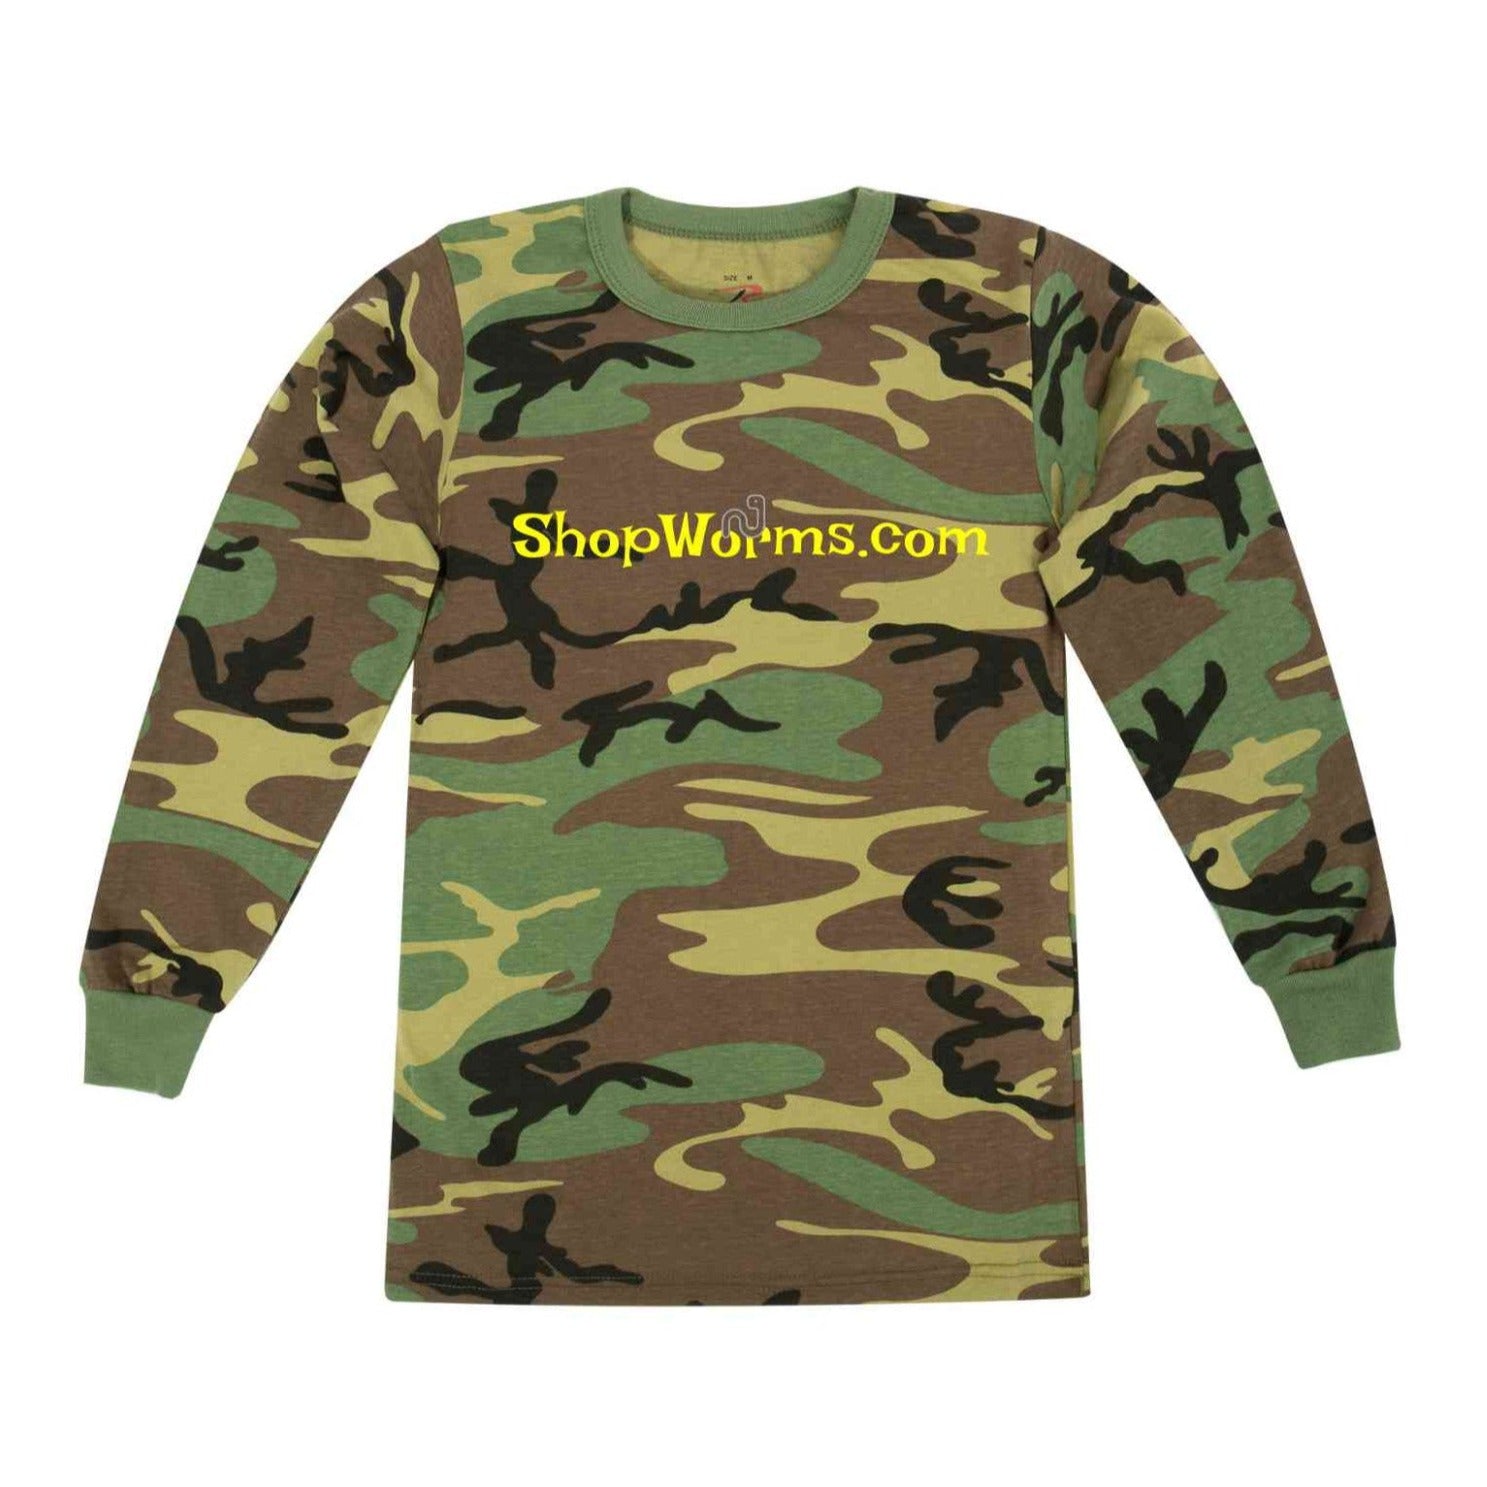 Camo Long Sleeve Shirt - Camo Long Sleeve Shirt - Shop Worms